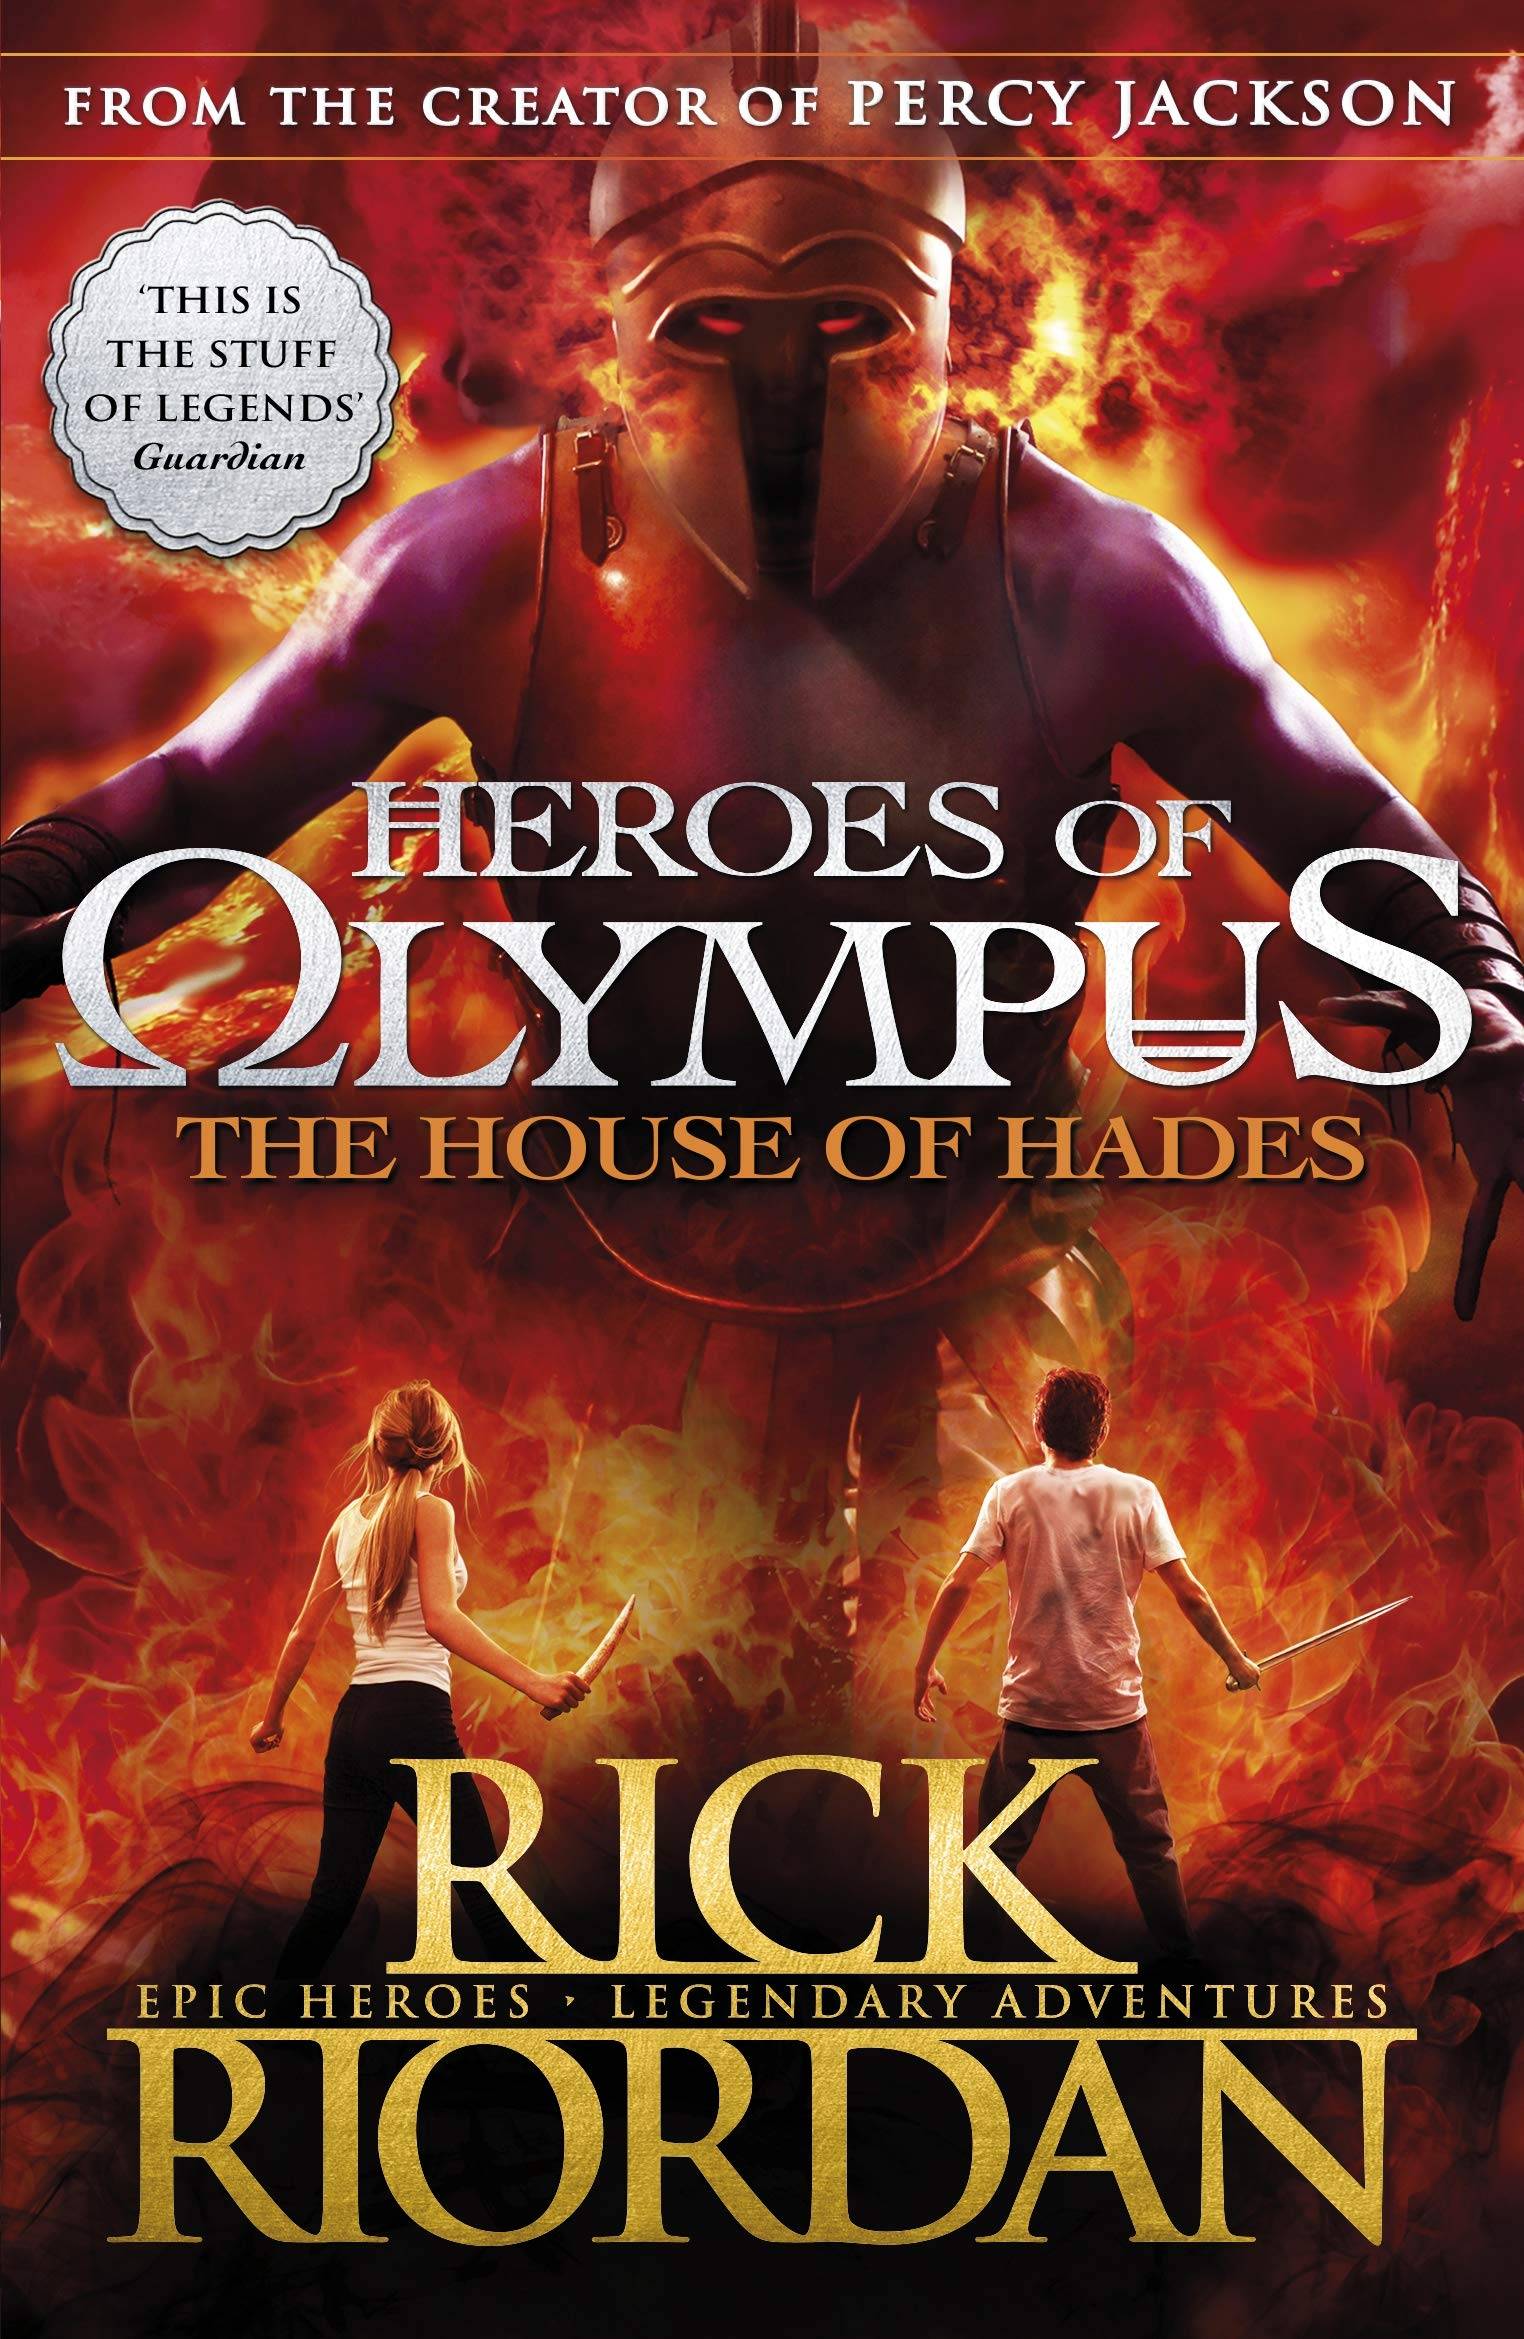 IMG : Heroes of Olympus The House Of Hades #4